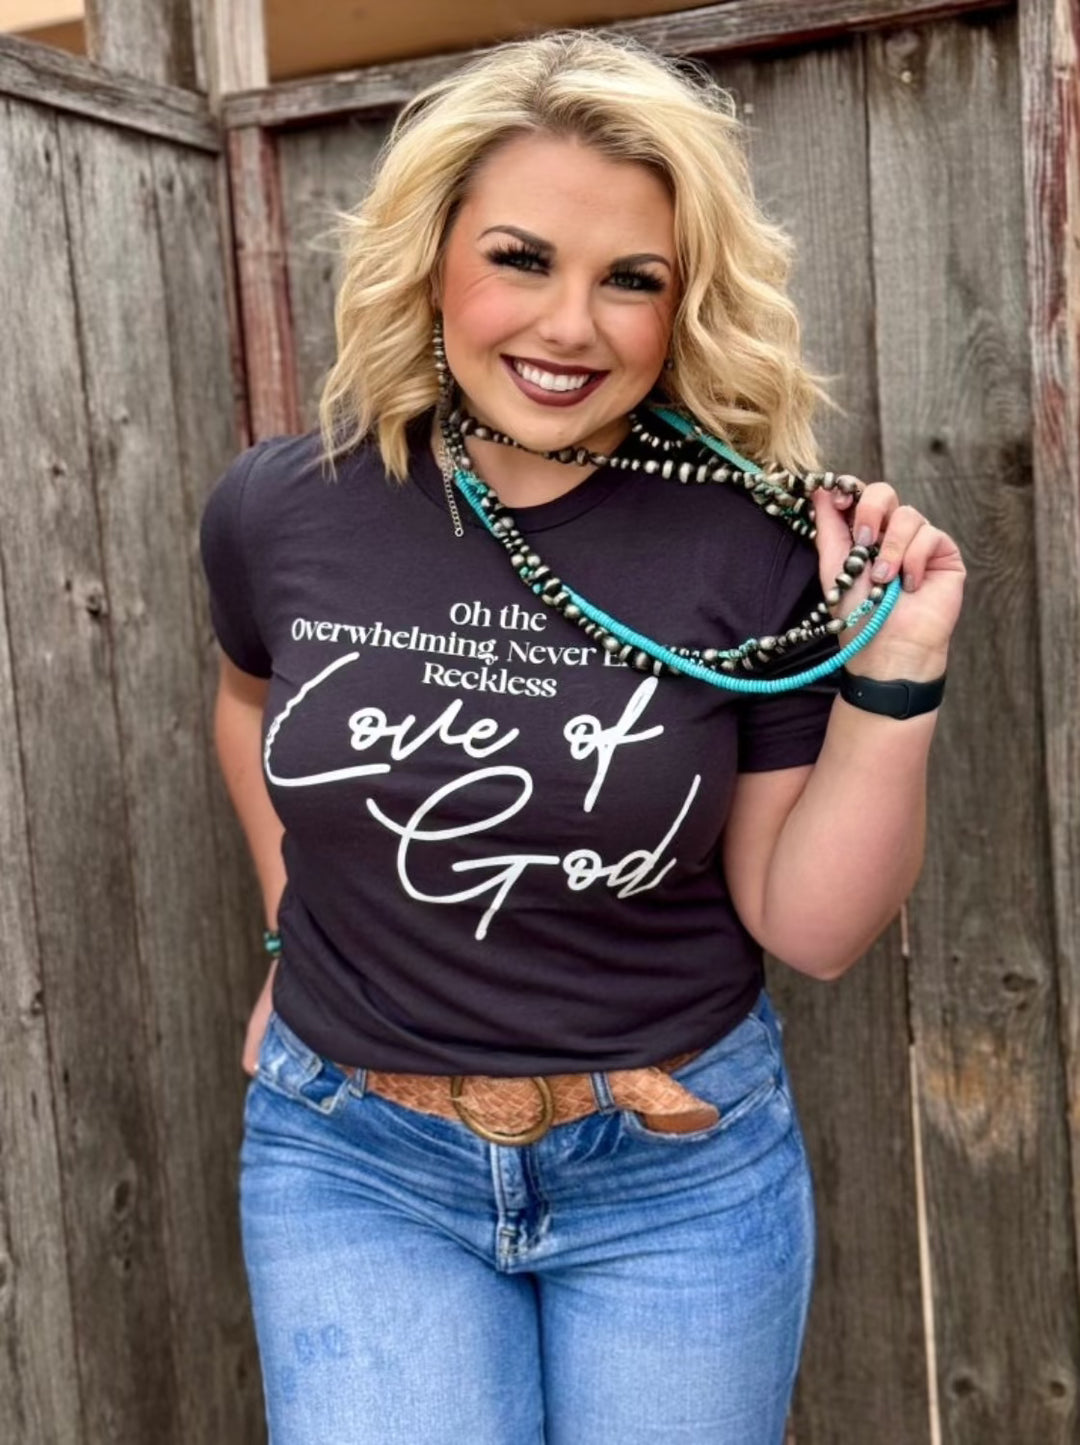 Reckless Love of God Graphic Tee by Texas True Threads